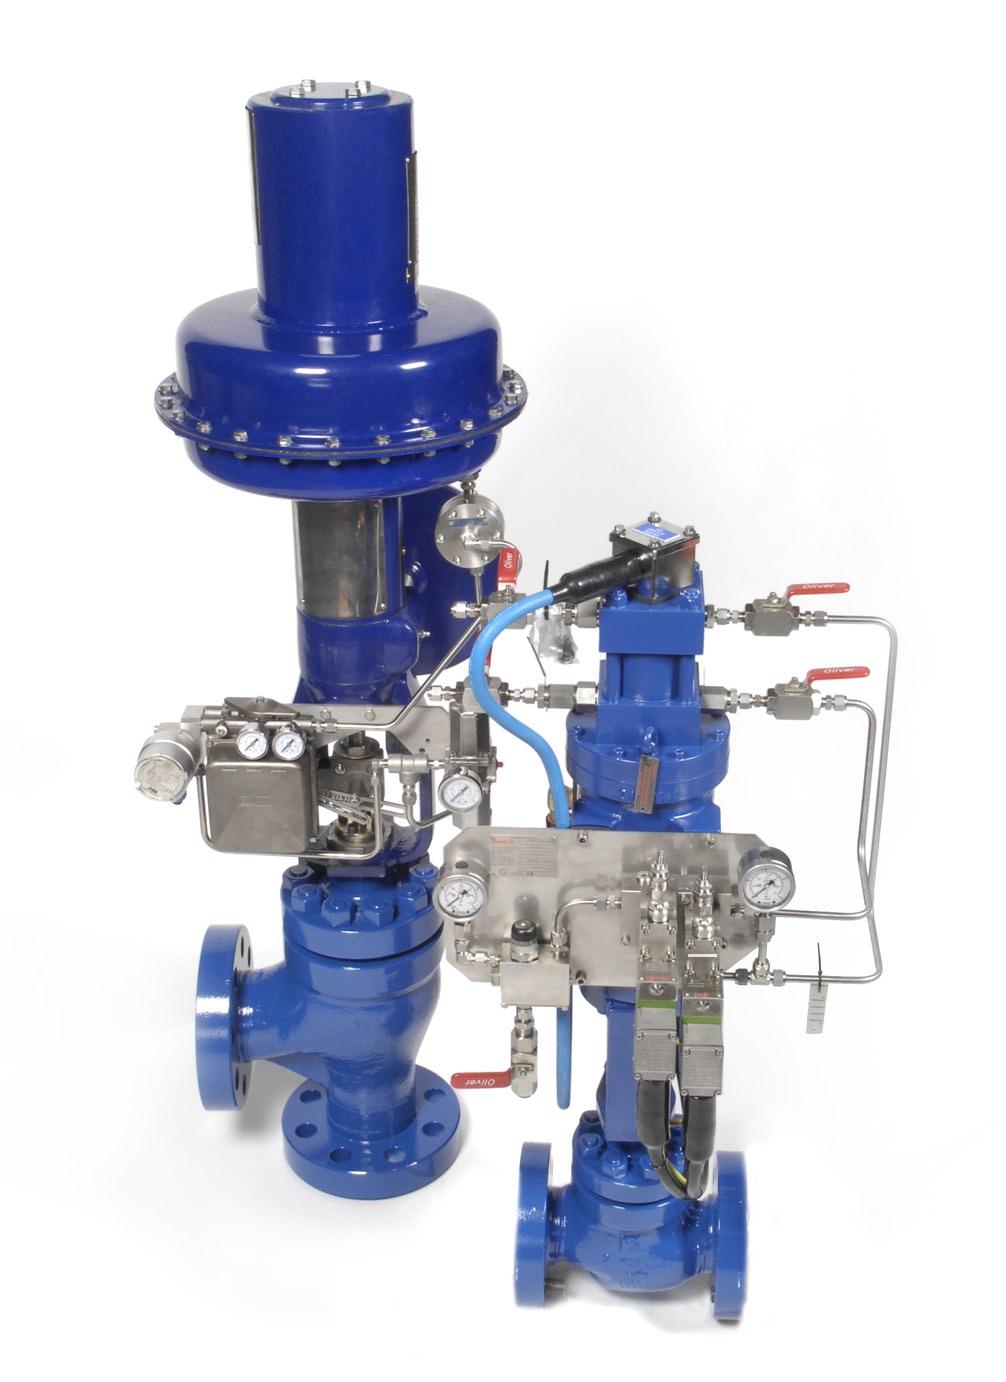 05 ACTUATORS VERSATILE, RELIABLE ACTUATORS FOR EVERY VALVE APPLICATION The KKI range of pneumatic actuators have been developed to meet the needs of all control valve applications.